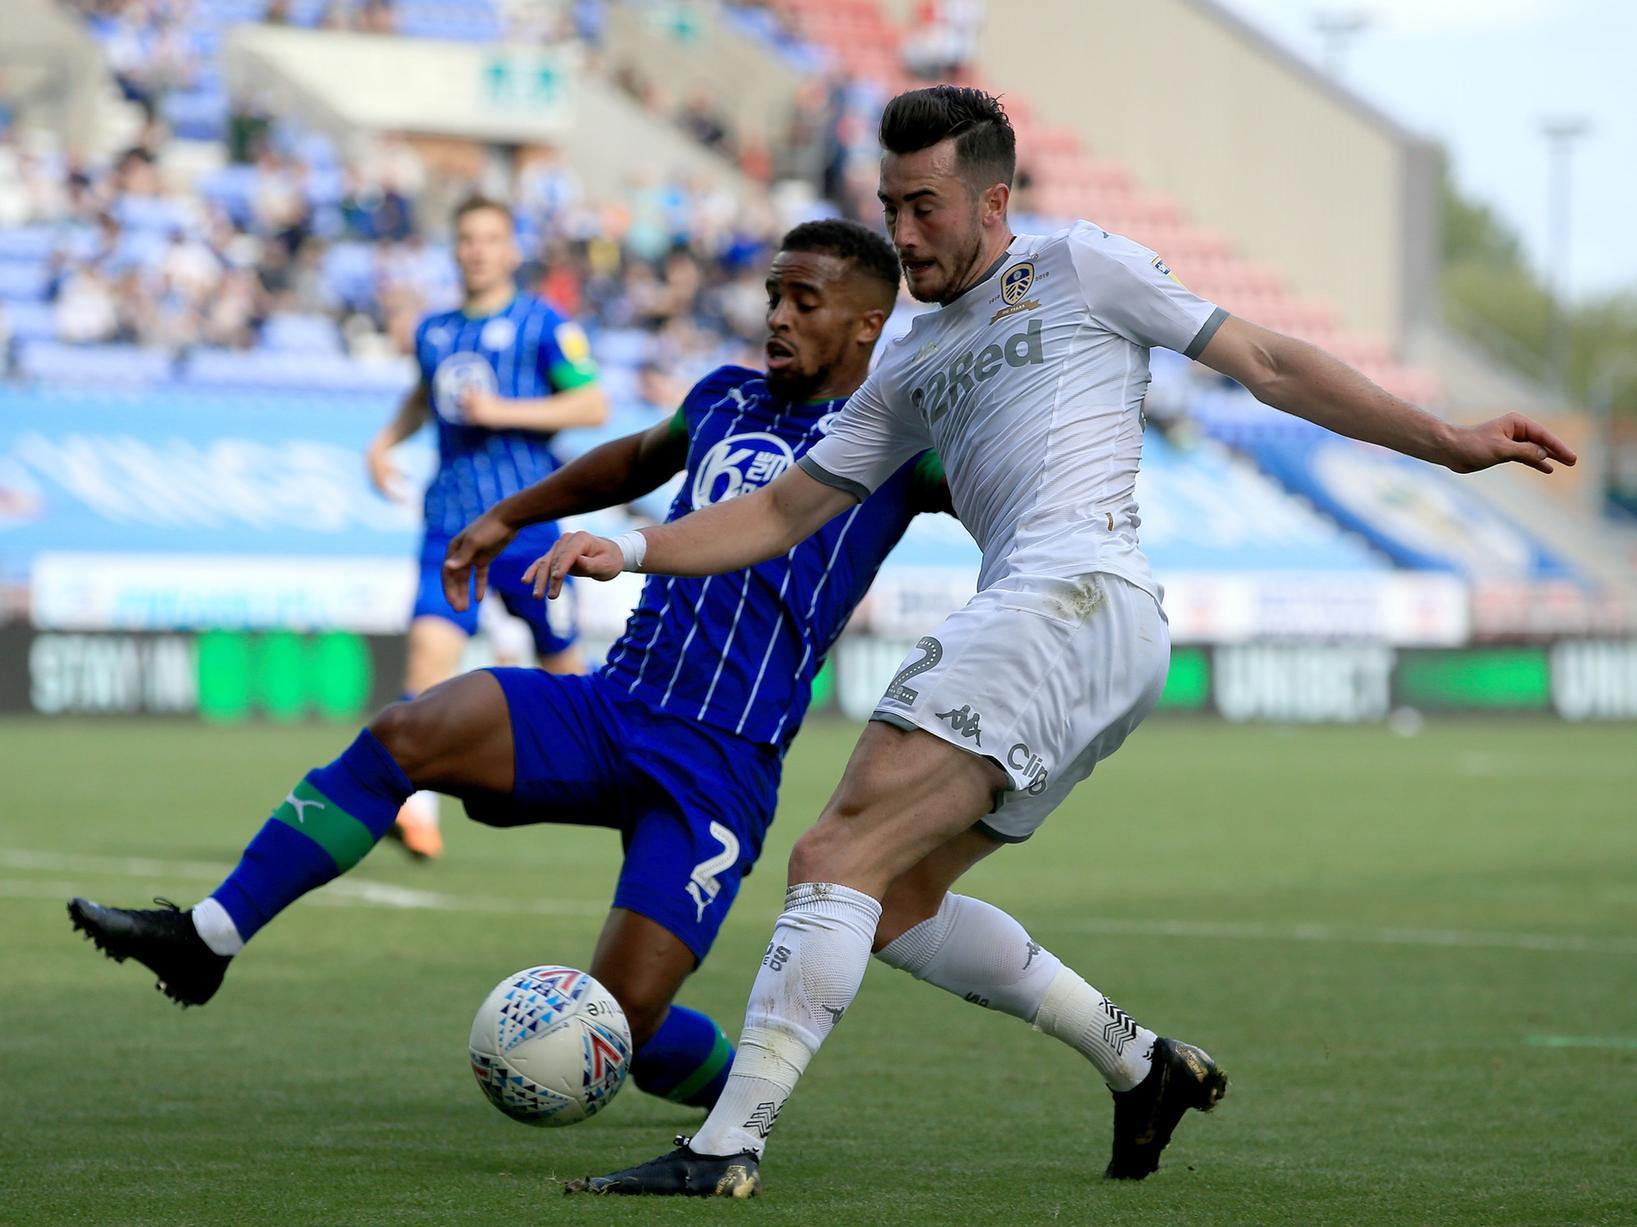 Nathan Byrne: 8 - Another fine game down the Latics right, shining at both ends of the field